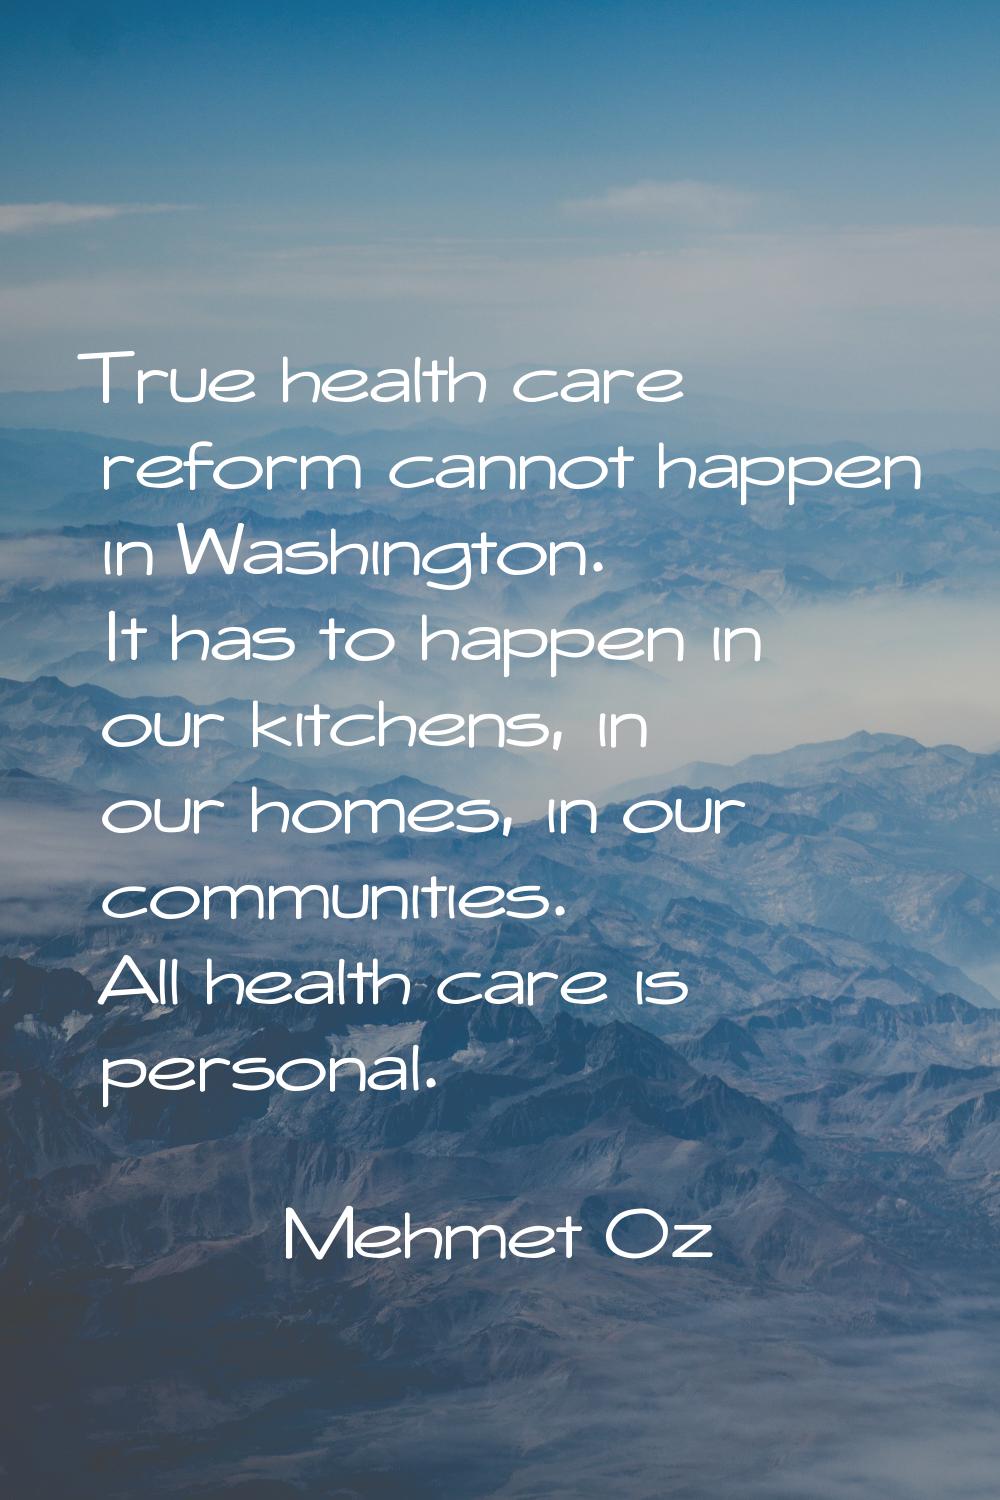 True health care reform cannot happen in Washington. It has to happen in our kitchens, in our homes